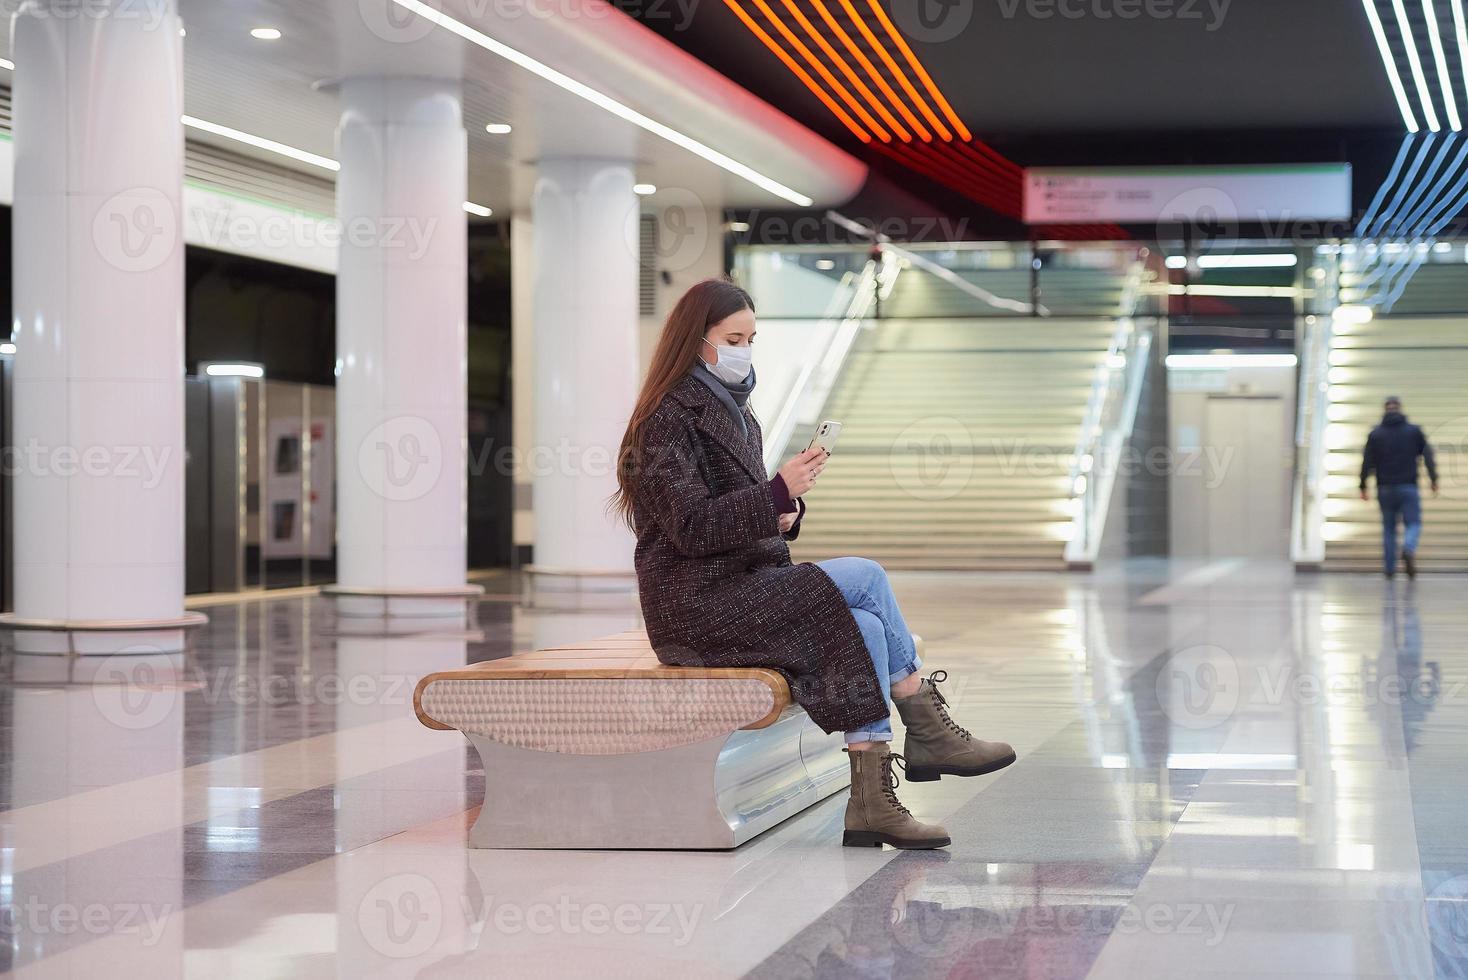 A woman in a medical face mask is waiting for a train and holding a smartphone photo